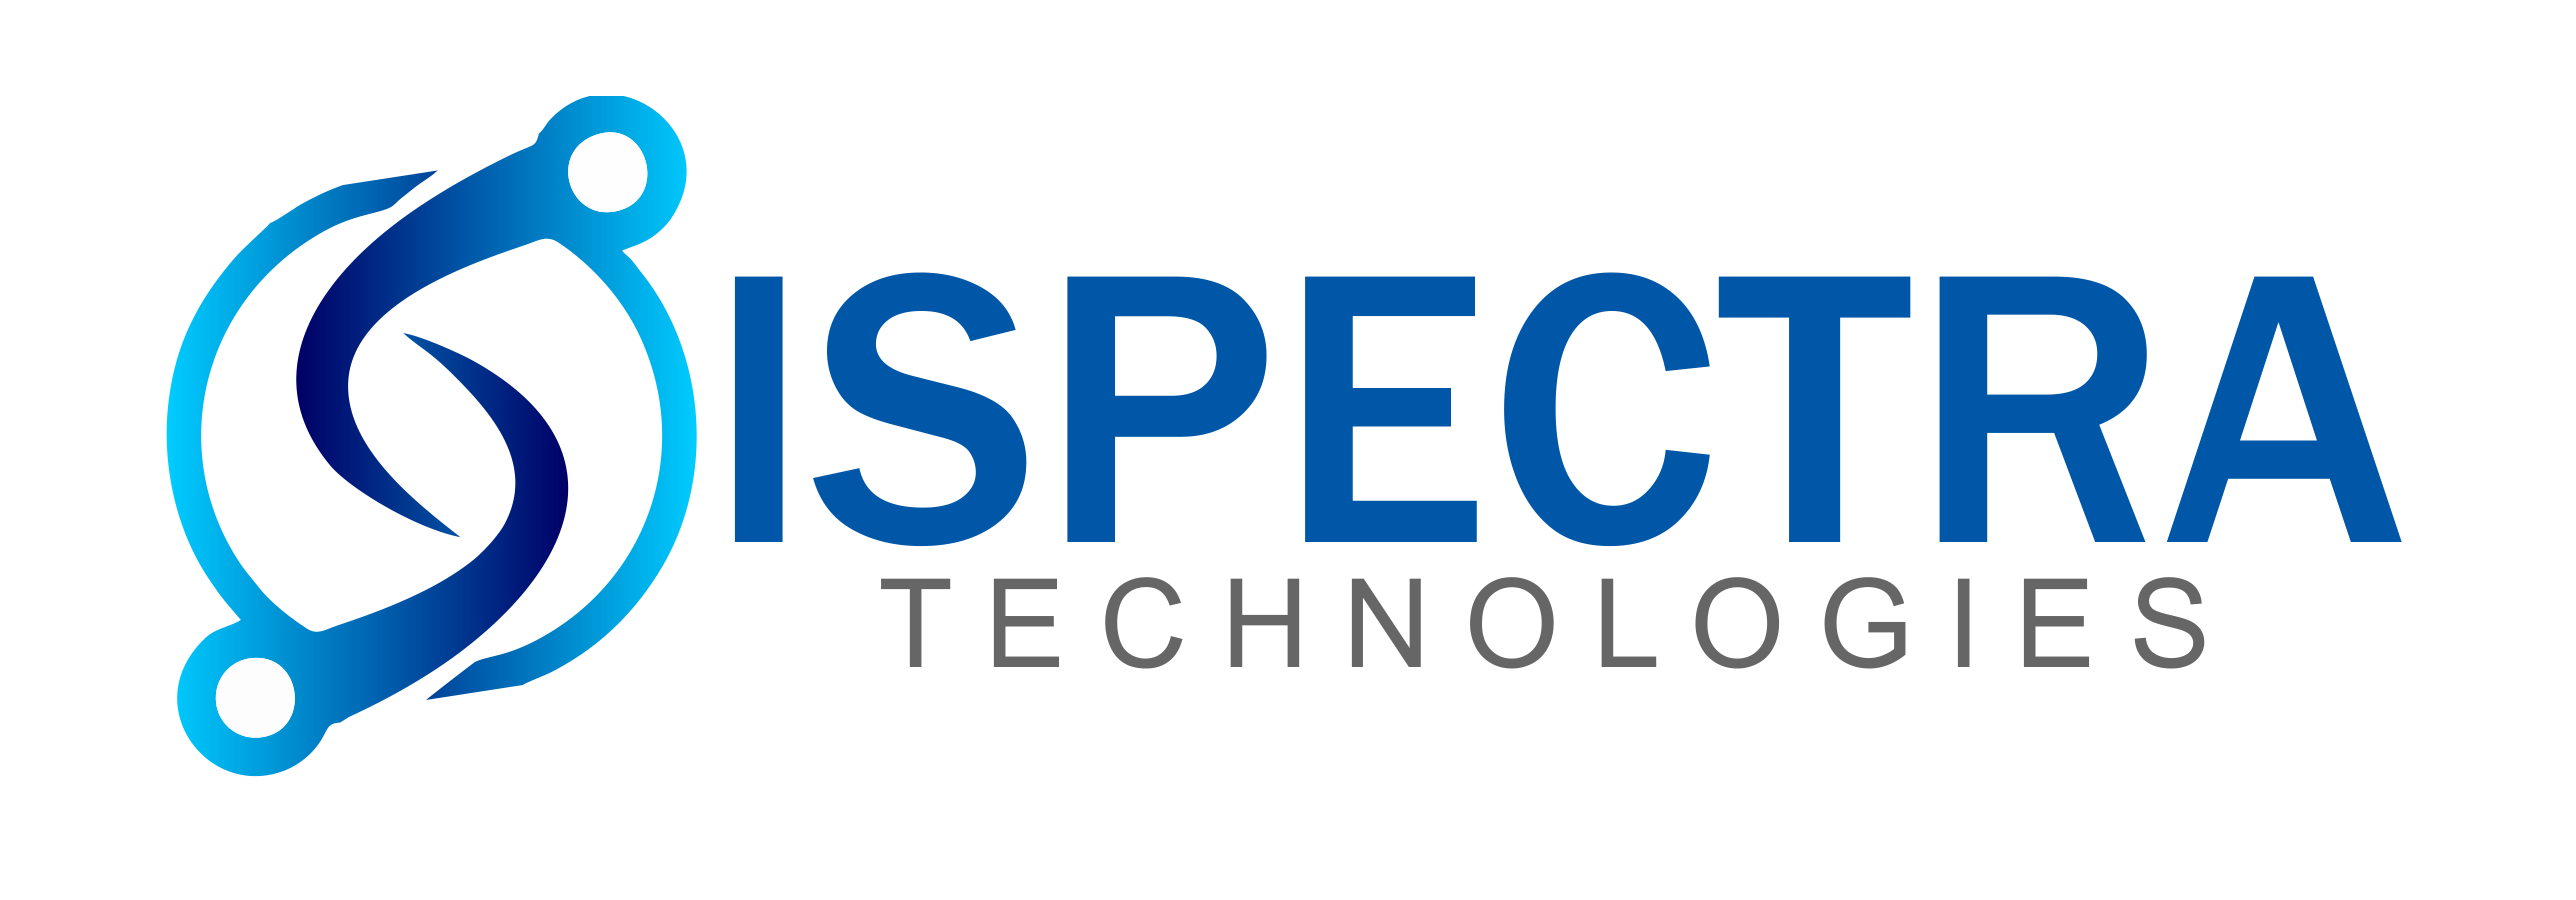 Expert Compliance Solutions by Ispectra Technologies